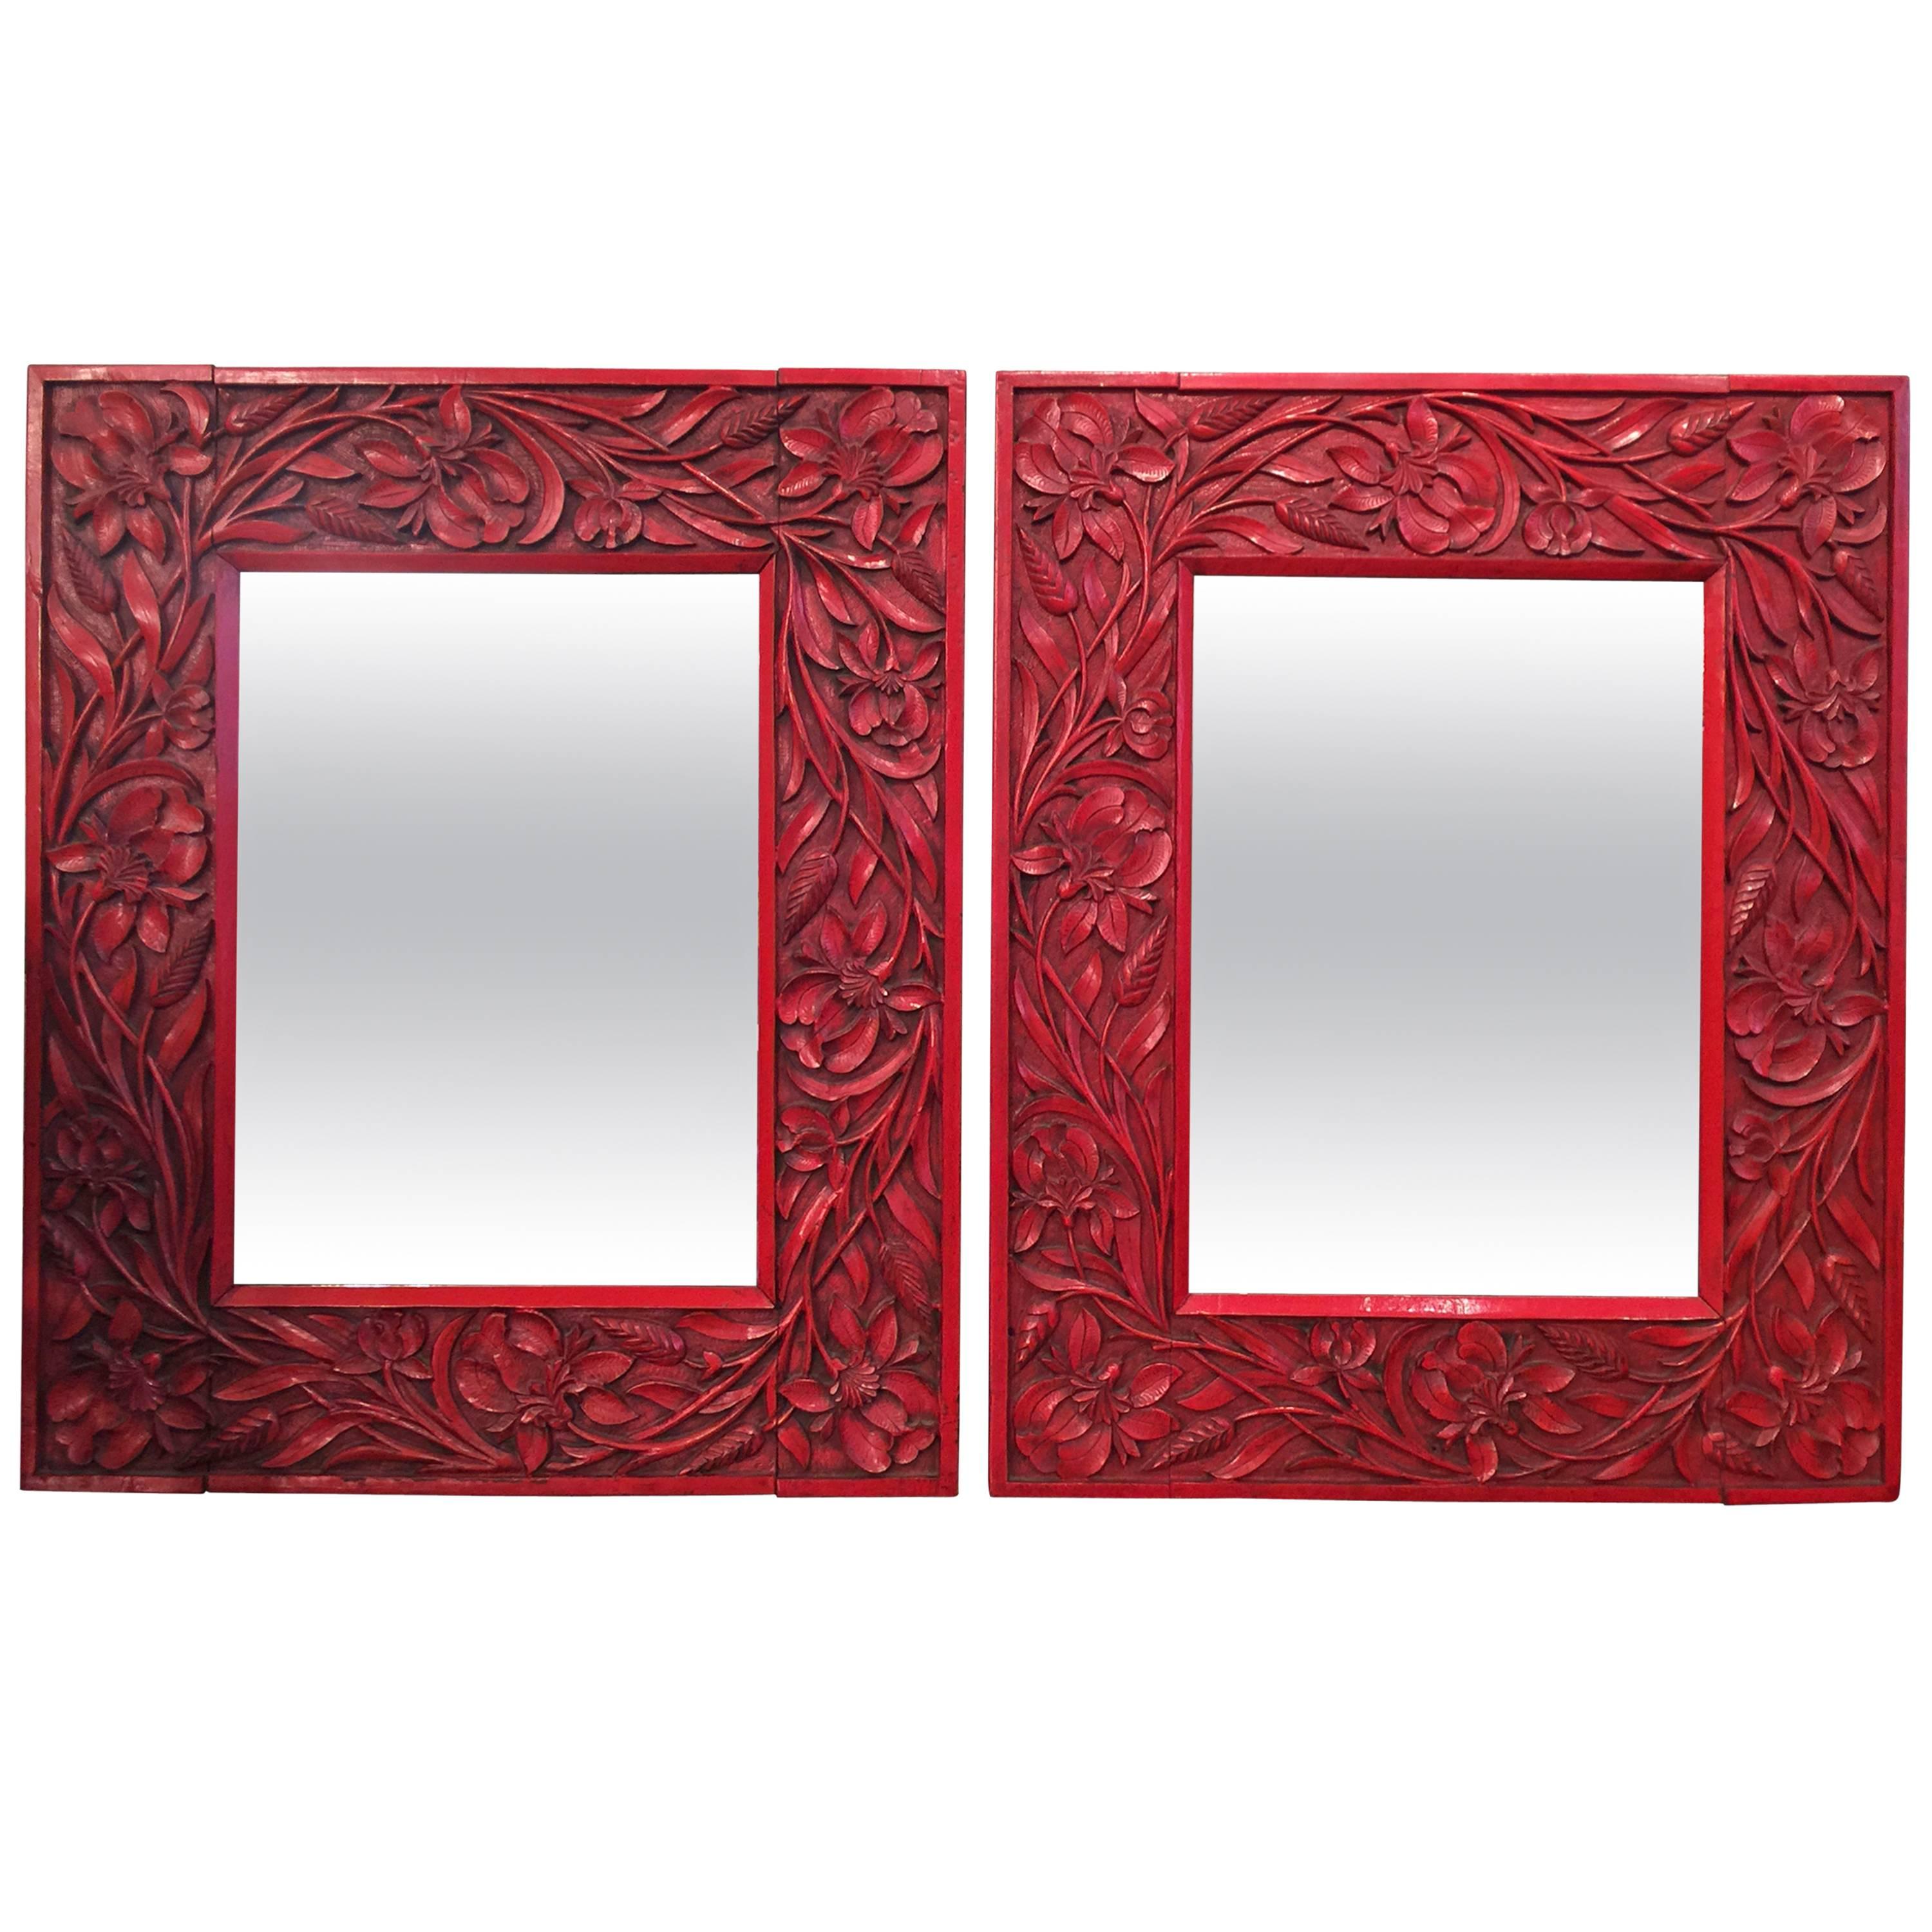 Pair of Red Lacquer Chinoiserie Mirrors